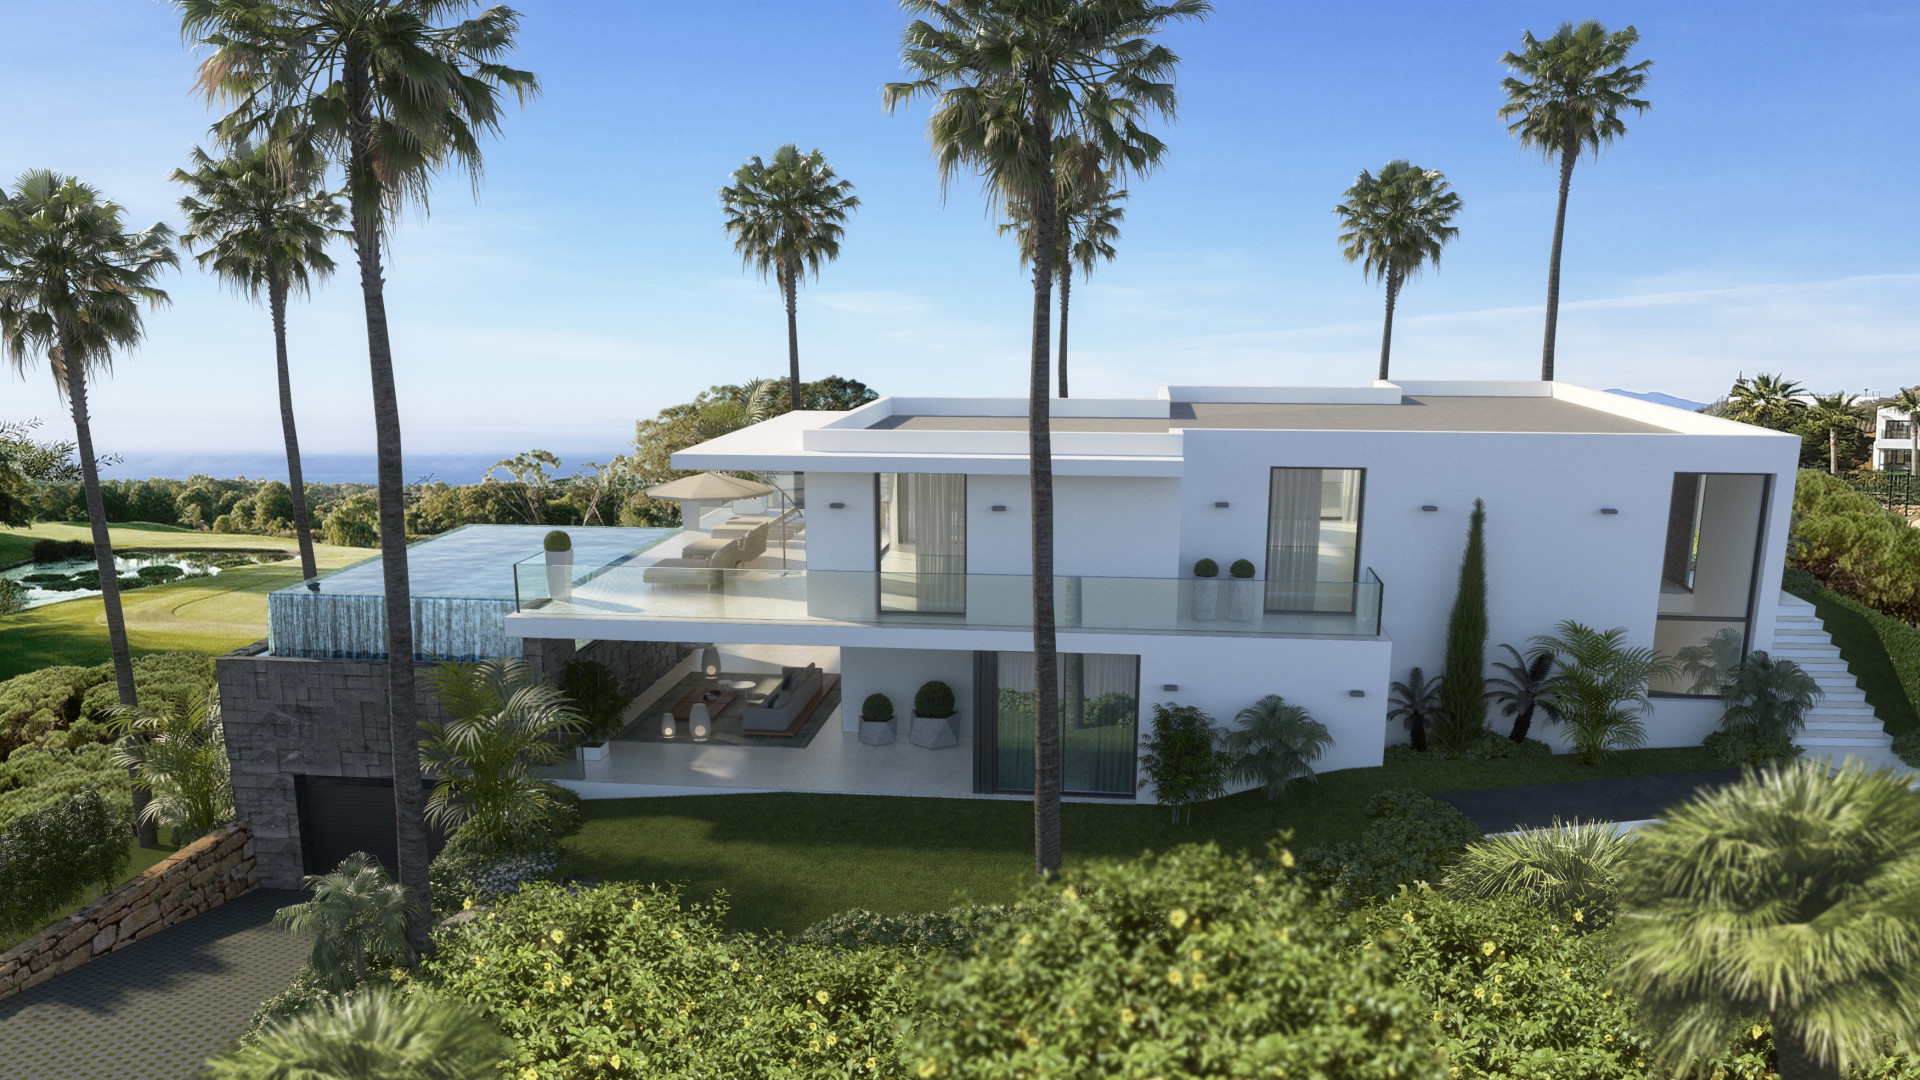 Cabopino Gardens: Exclusive project of only 5 villas with luxury finishes located frontline golf in Marbella. | Image 3